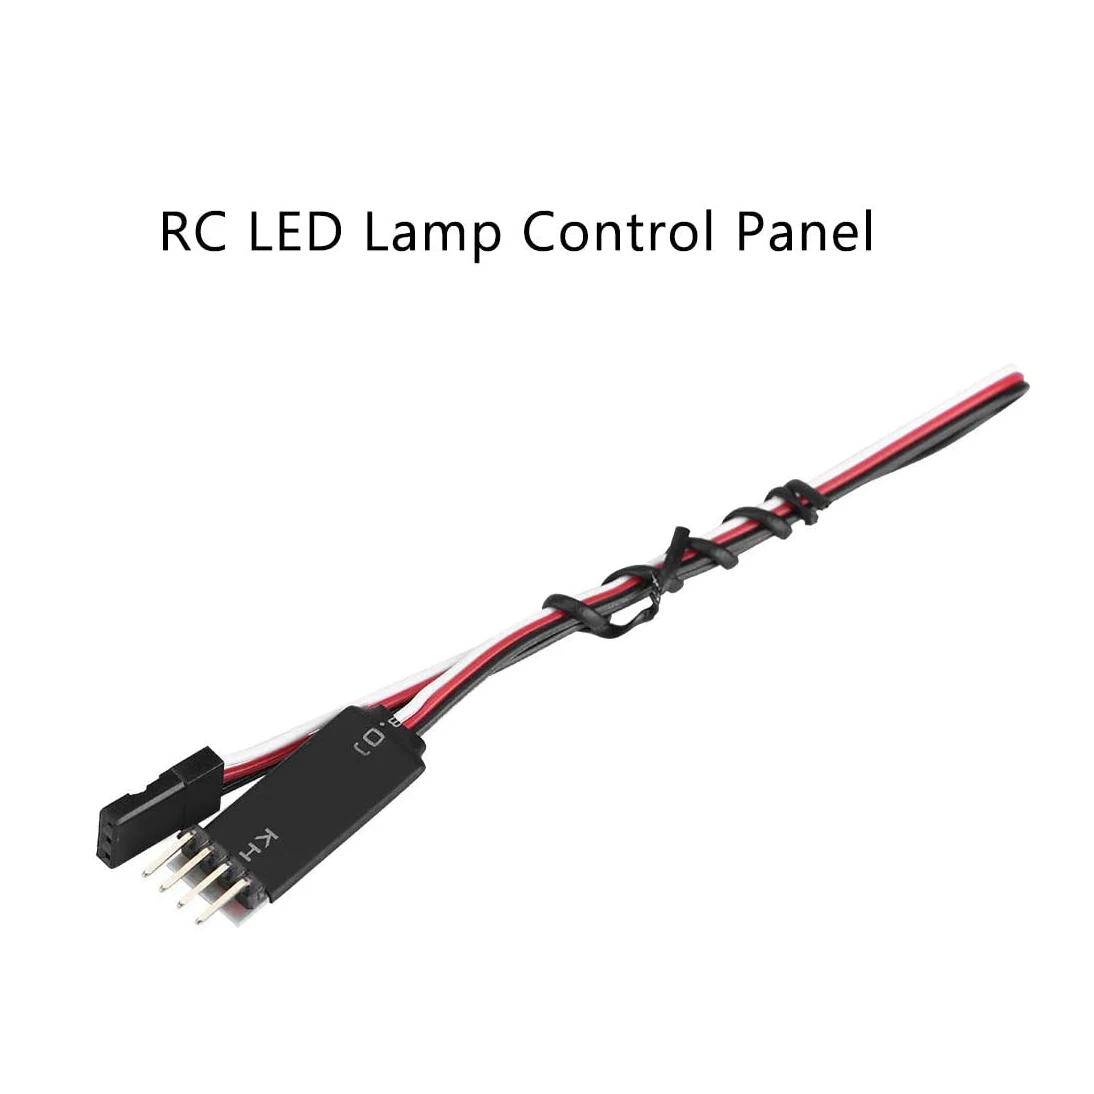 Rc Light Switch Module Rc Car Light On/Off Suitable for Traxxas Remote Control Model Car Light Control Switch Scx10